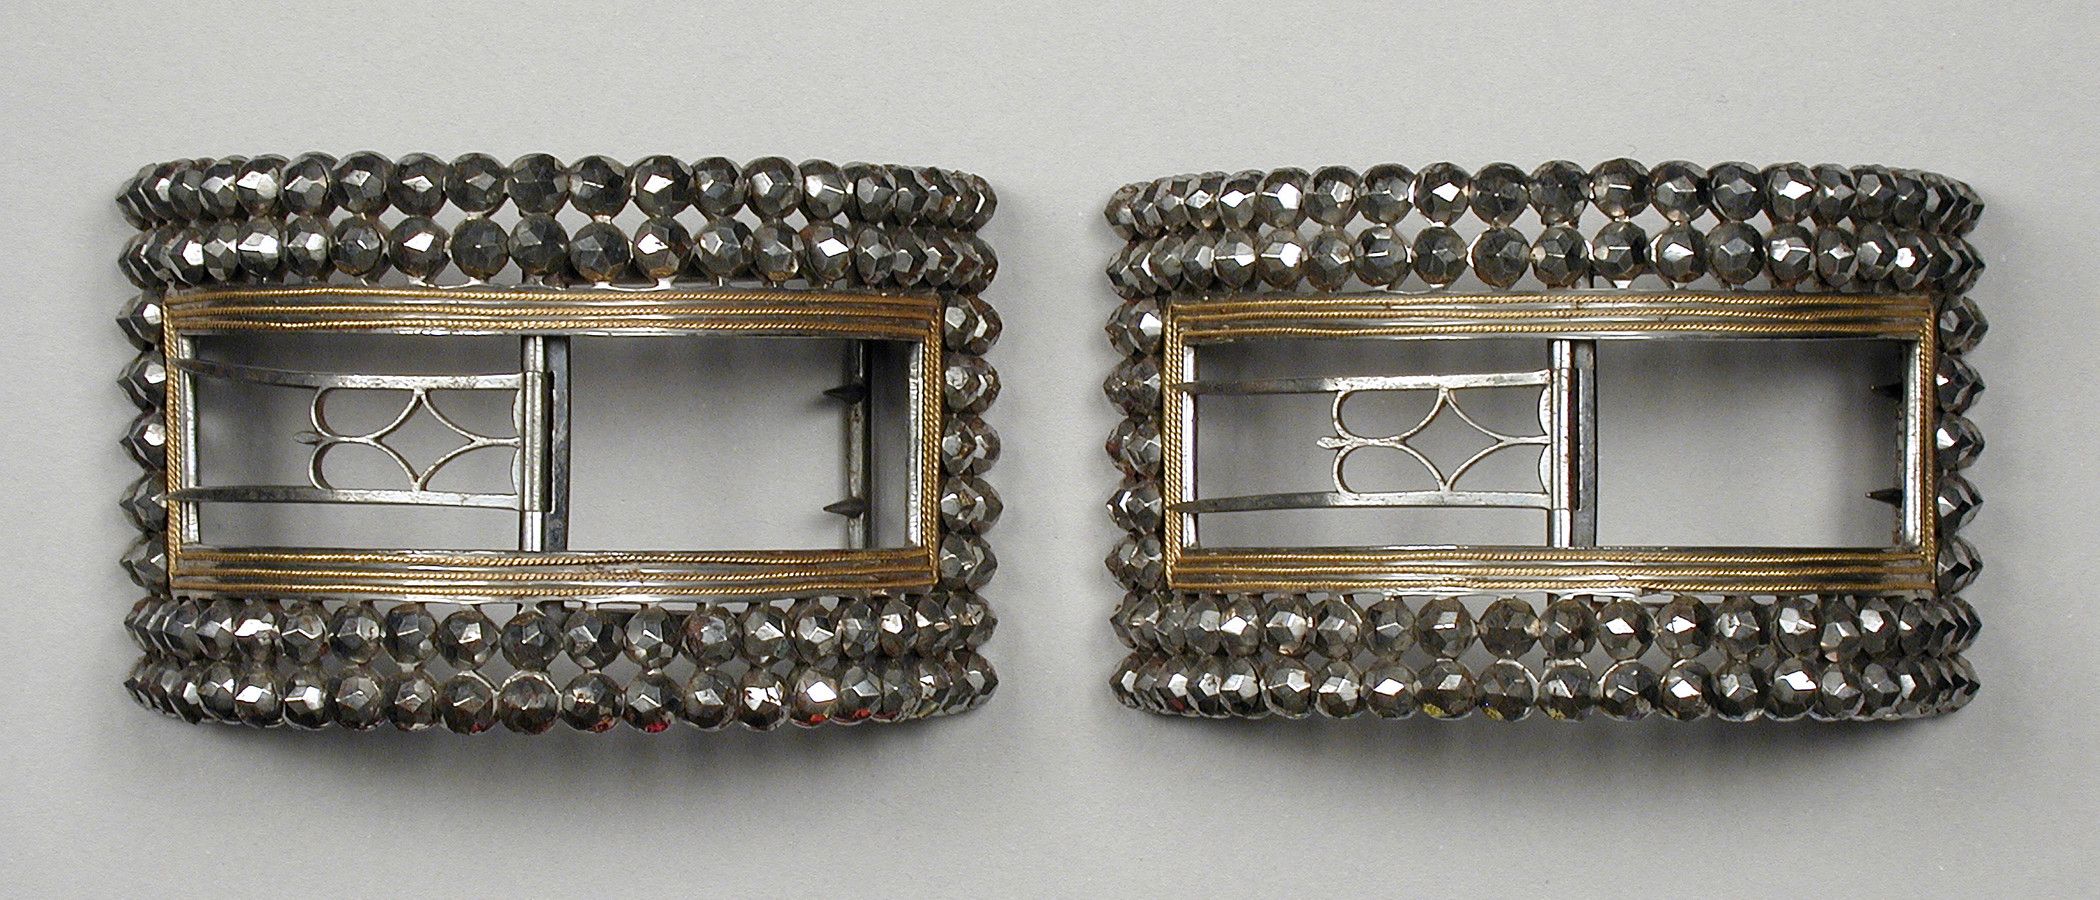 Cut steel shoe buckles with gold edging,  English, 1780s. The Los Angeles County Museum of Arts. 